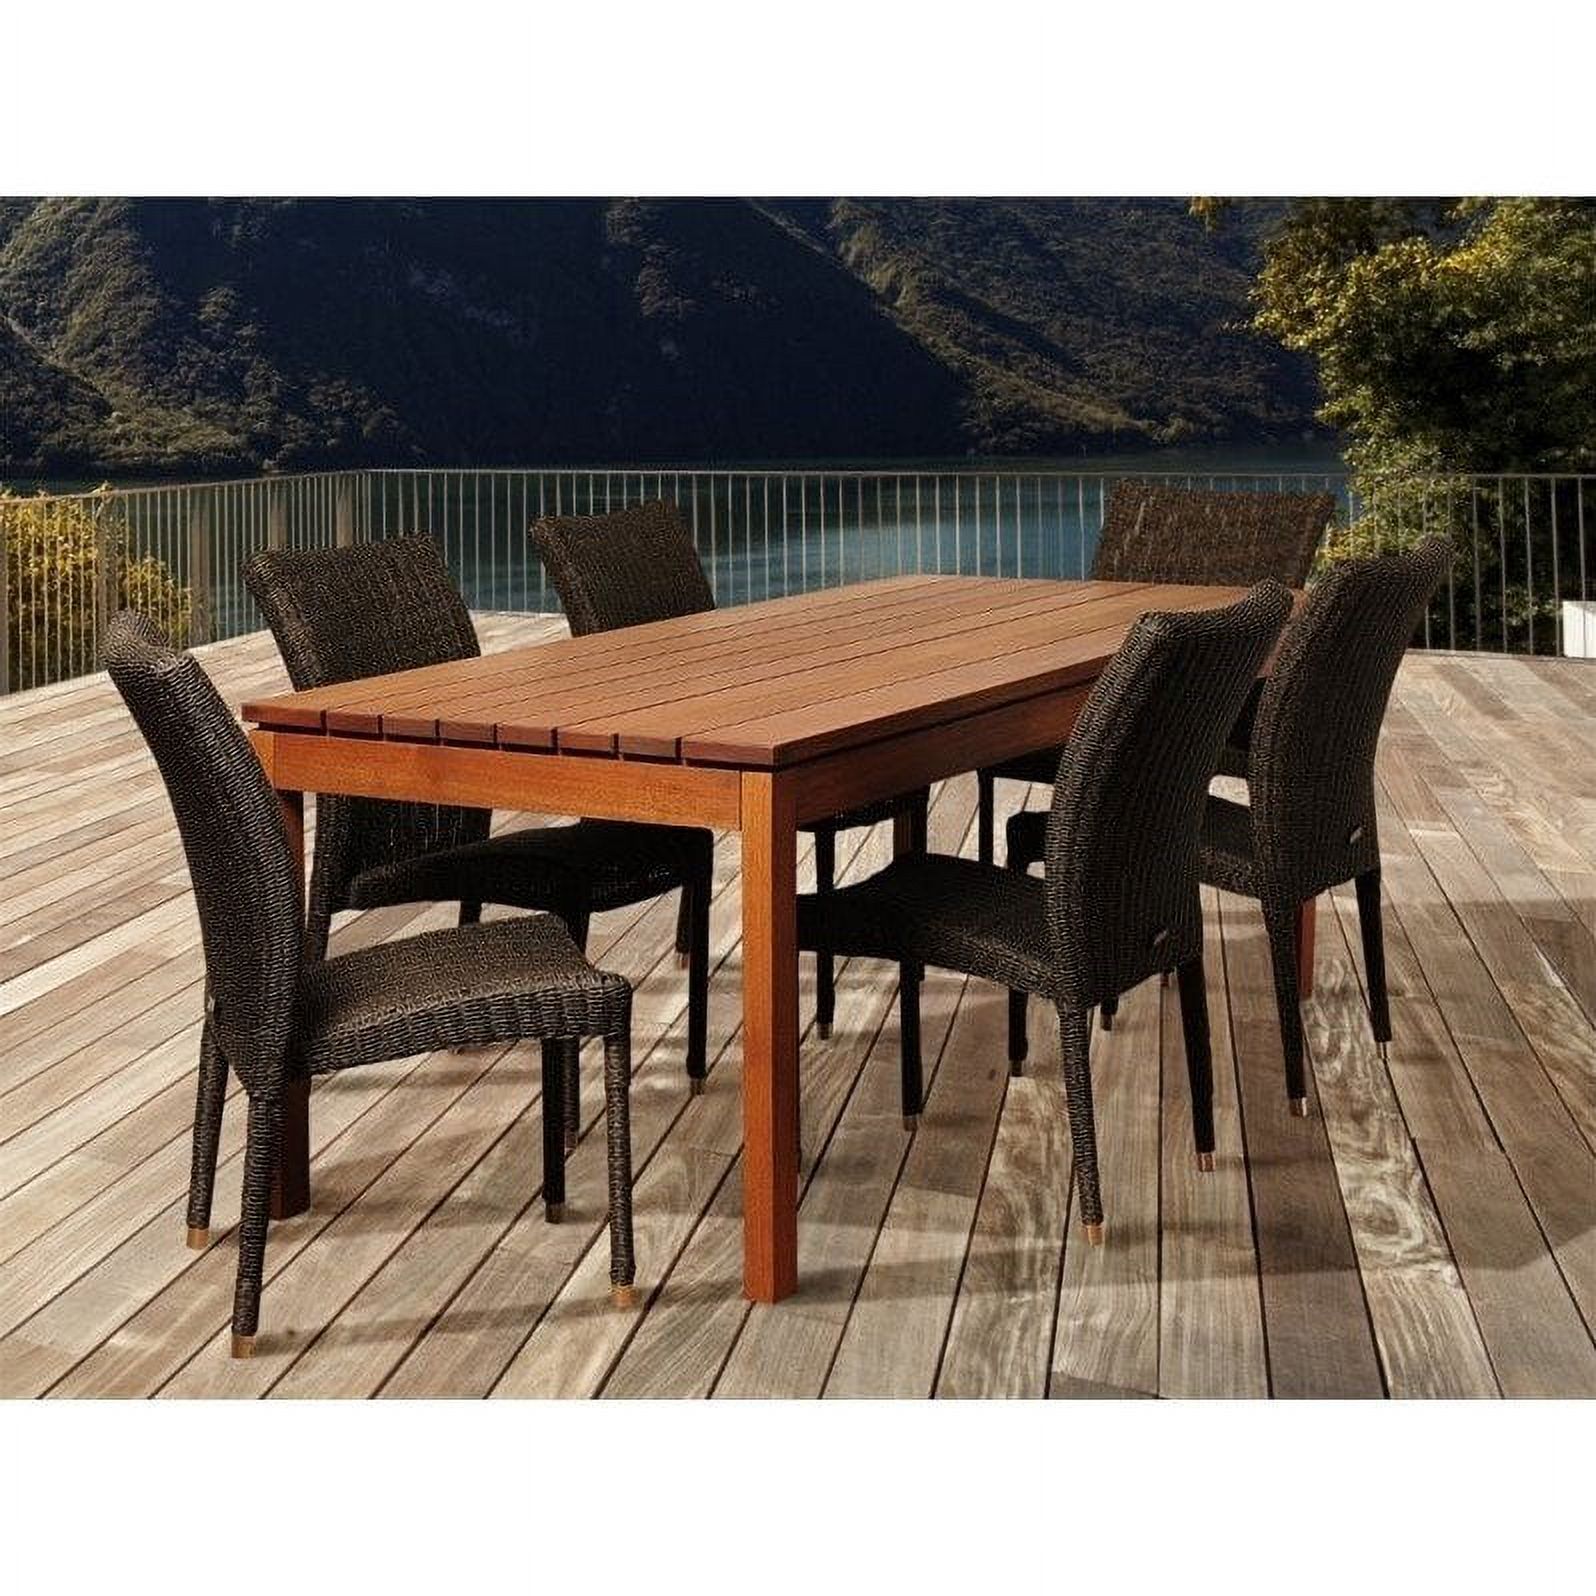 Amazonia Jamison 7-Piece 100% FSC Solid Wood and Eco-Friendly Wicker Rectangular Patio Dining Set - image 1 of 14